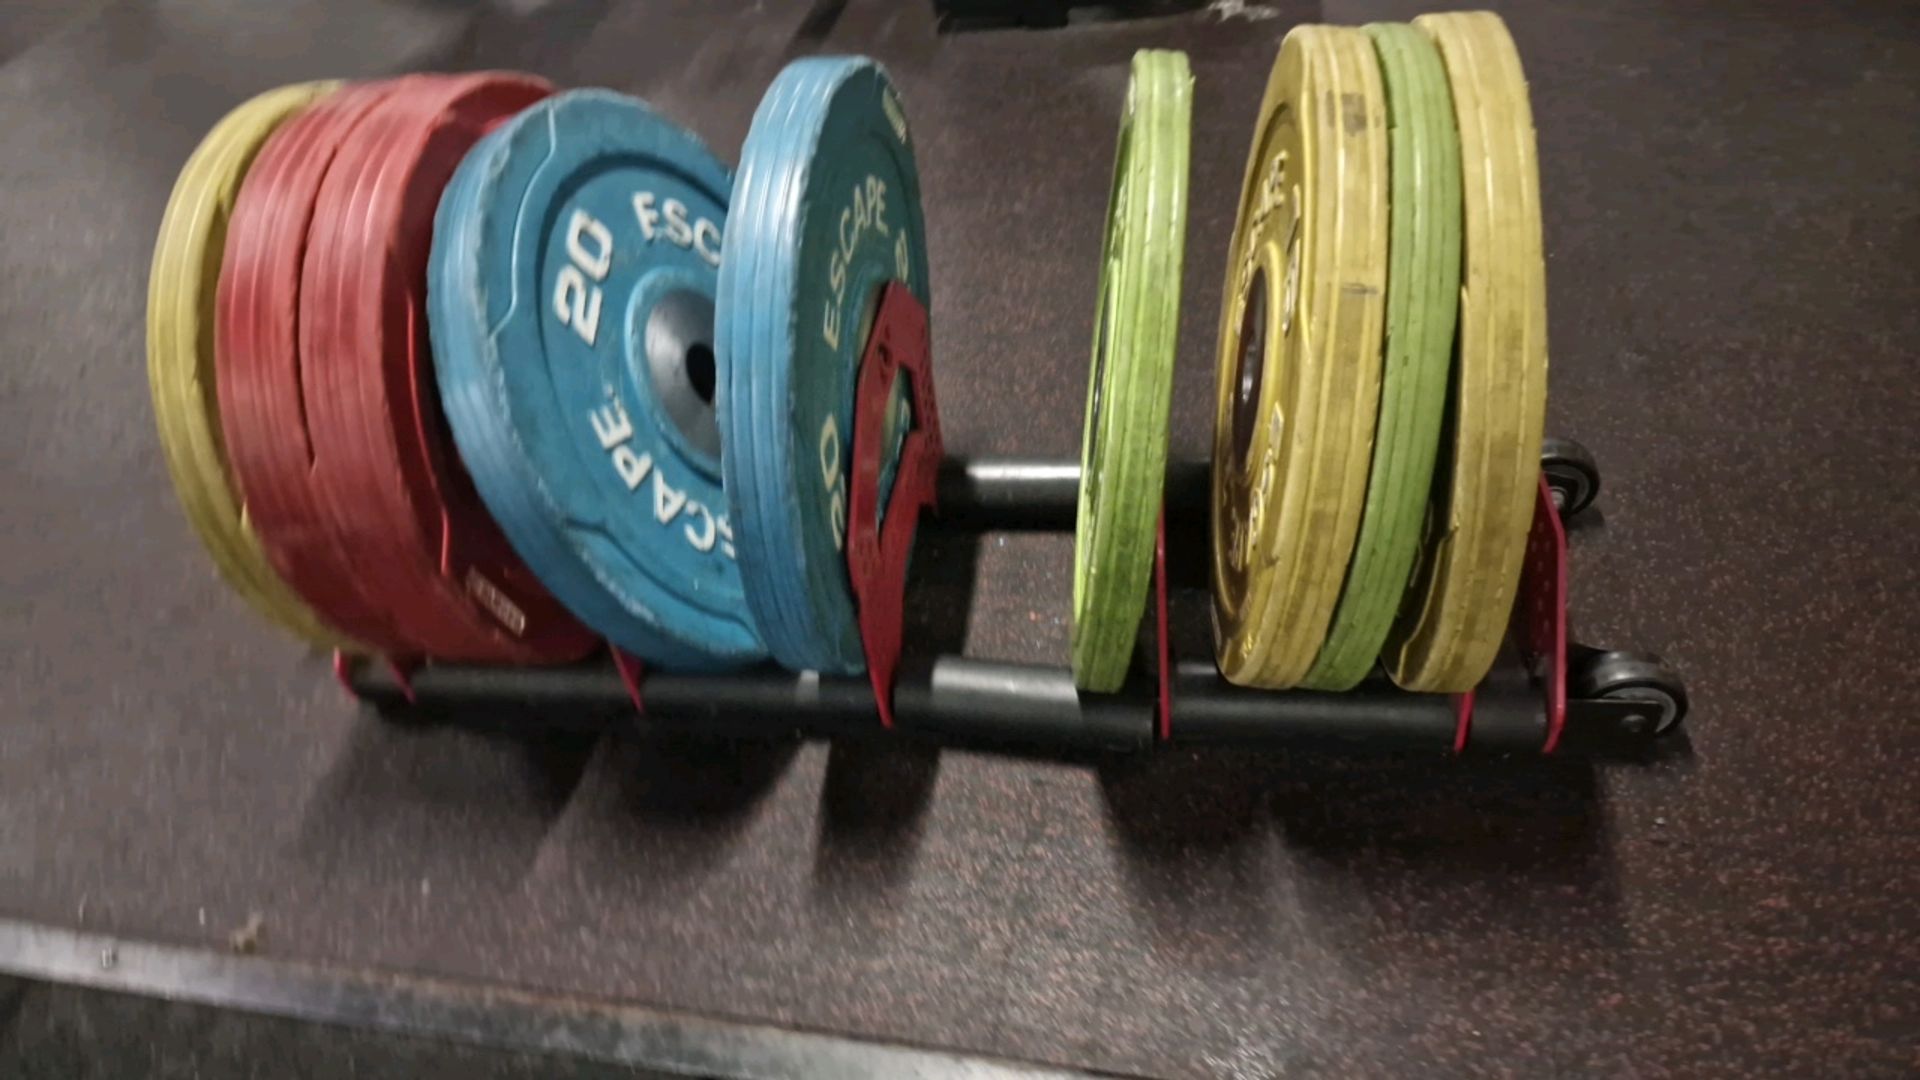 Escape Weight Plate Stand - Image 3 of 3